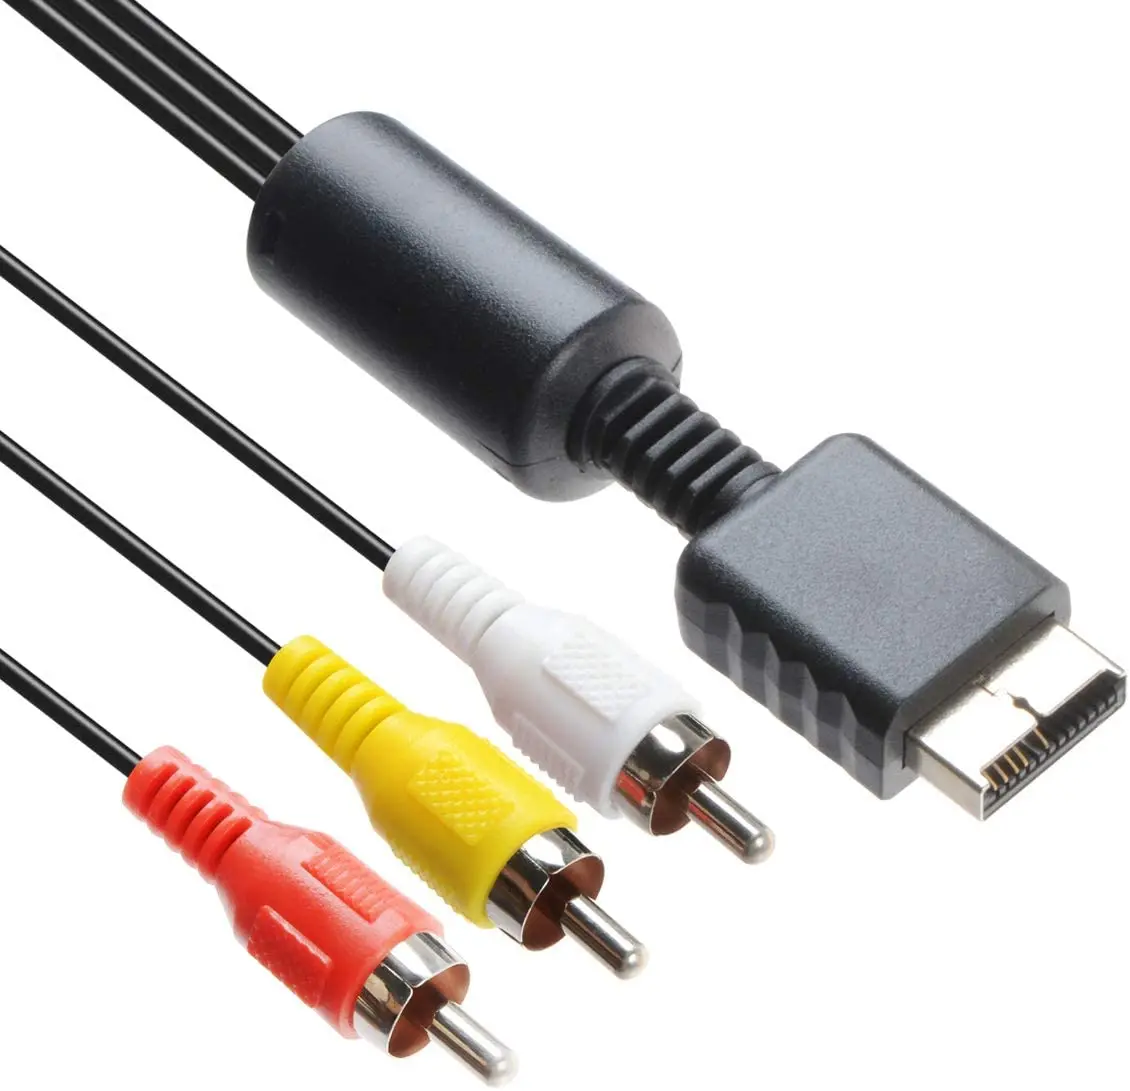 Source For PS2 PS3 AV Conversion Cable 1.8m Audio Video To 5 RCA AV Cable TV Video Cable for Playstation 2 3 PS3 For Game TV on m.alibaba.com